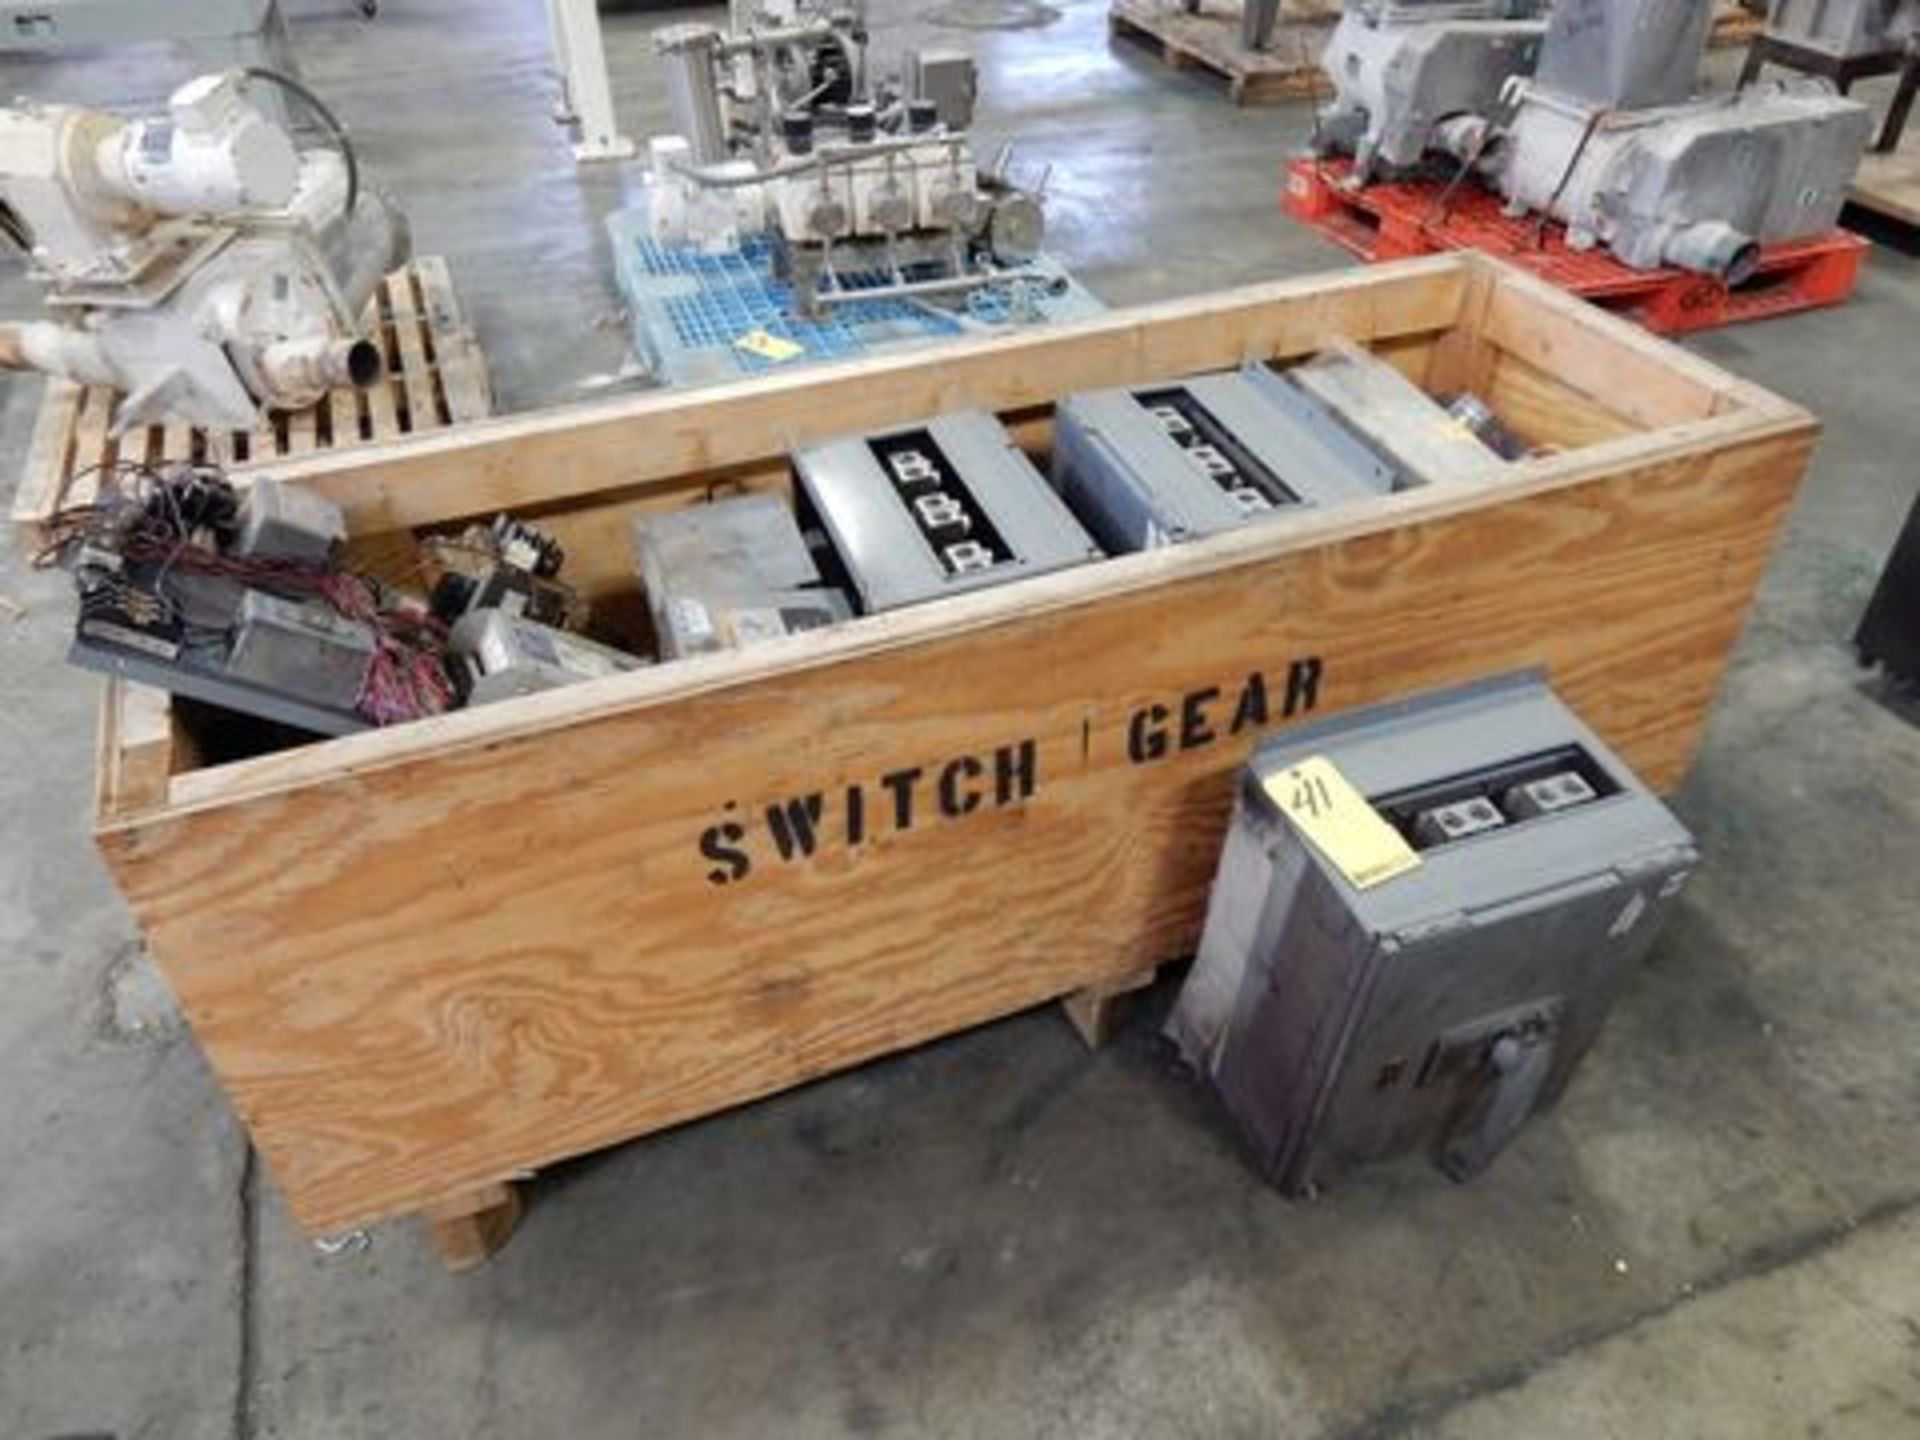 LOT ELECTRICAL SWITCH GEAR TO INCLUDE (3) 600 AMP, 3PH DISCONNECTS, CONTROL EQUIP., ETC.